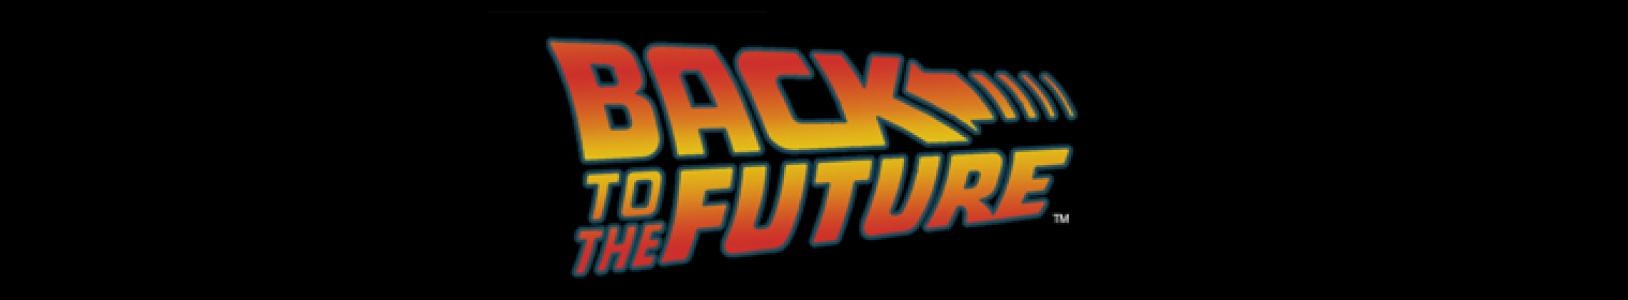 Back to the Future banner